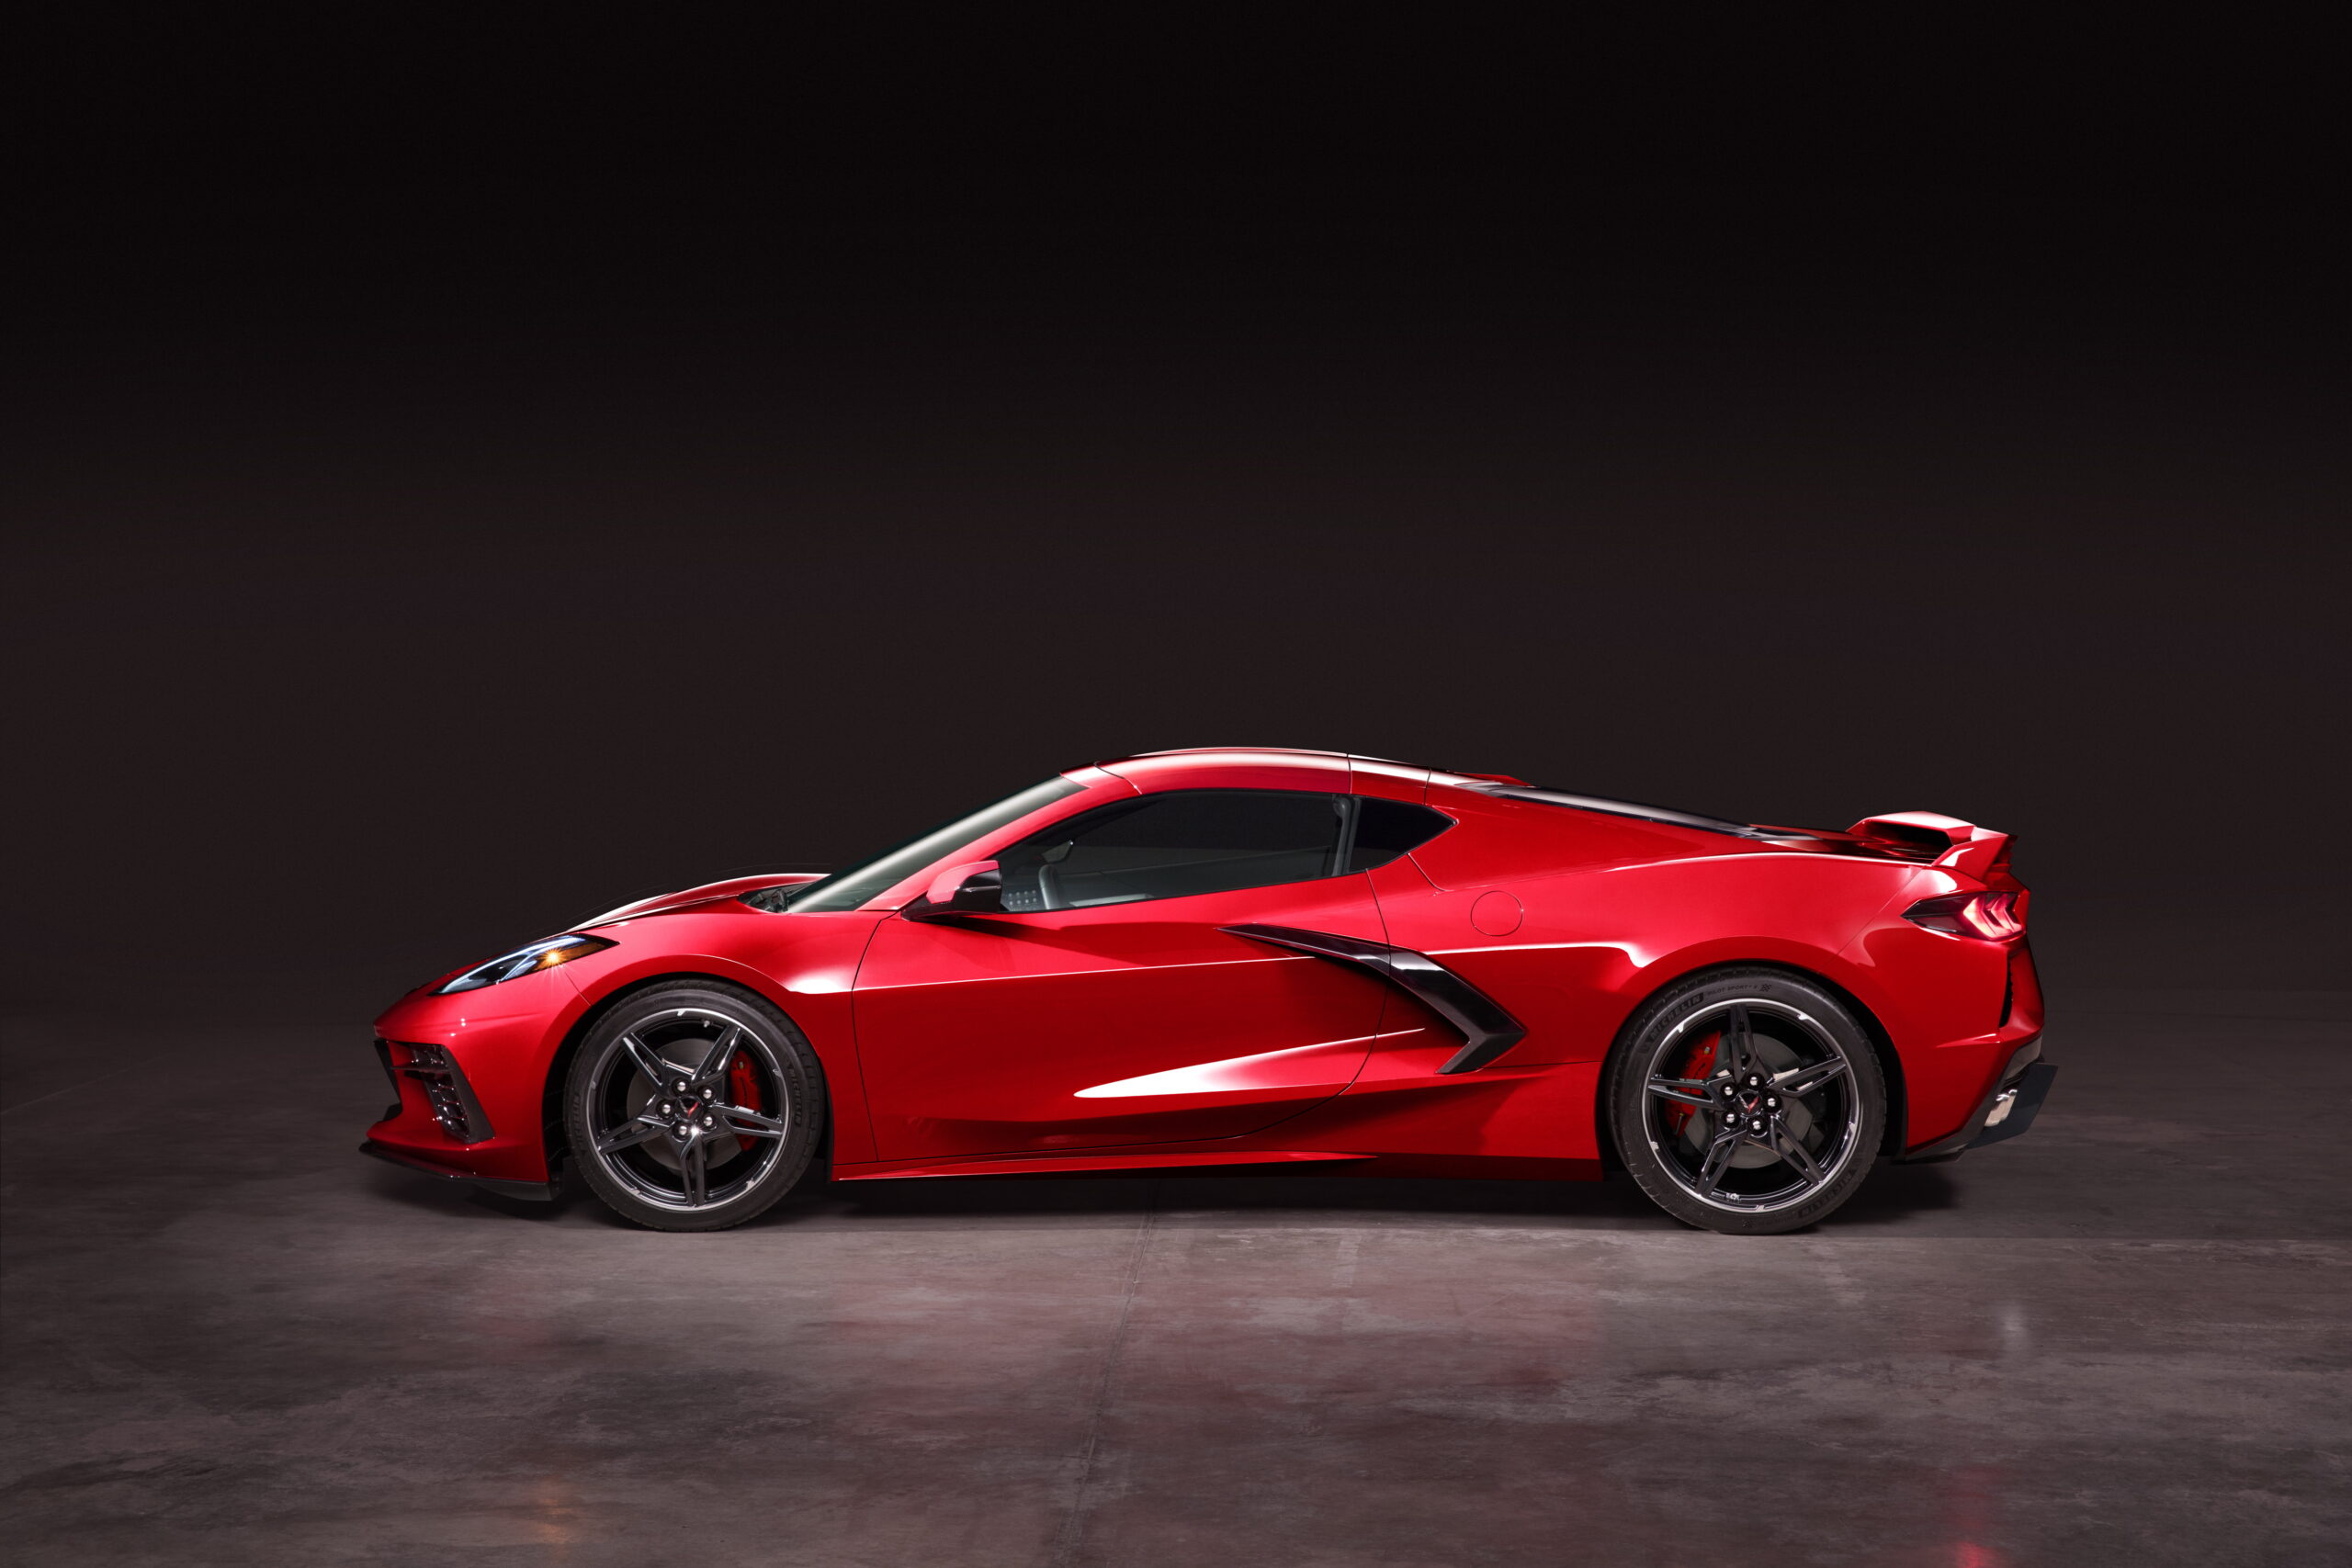 Chevy Hits a Home Run with the C8 Corvette (but missed the grand slam)